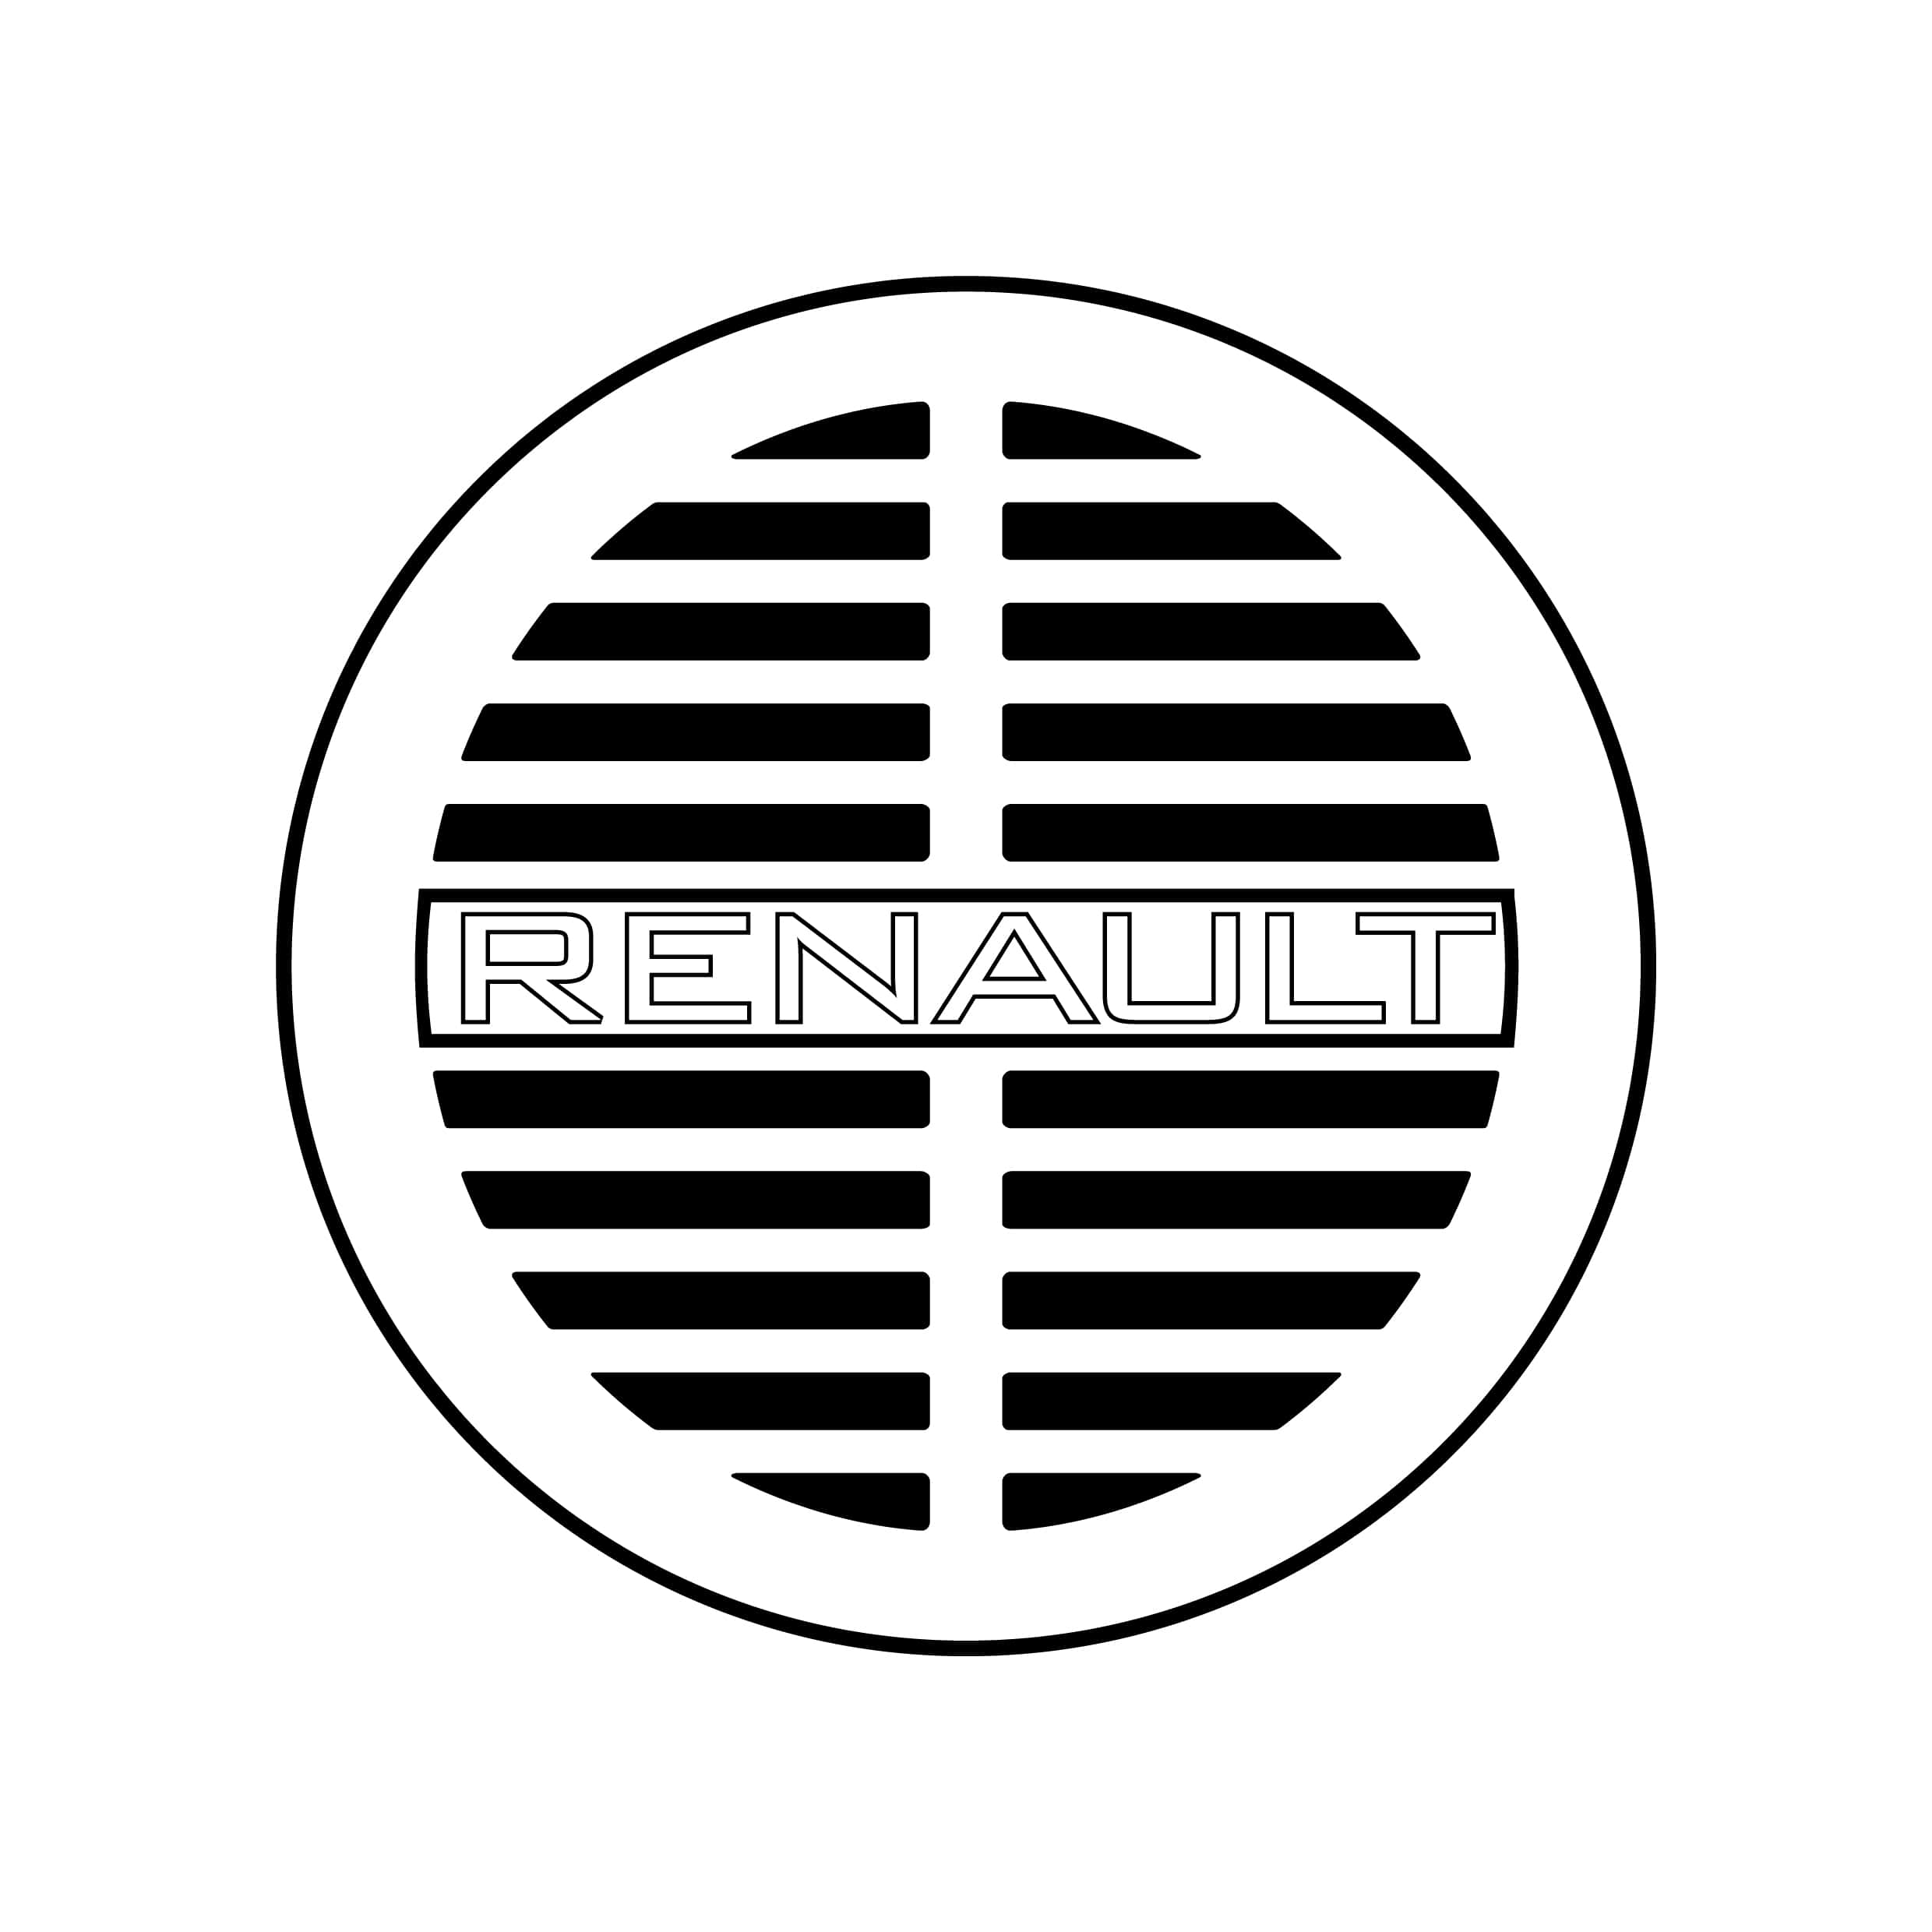 stickers-renault-ref140-old-autocollant-voiture-sticker-auto-autocollants-decals-sponsors-racing-tuning-sport-logo-min